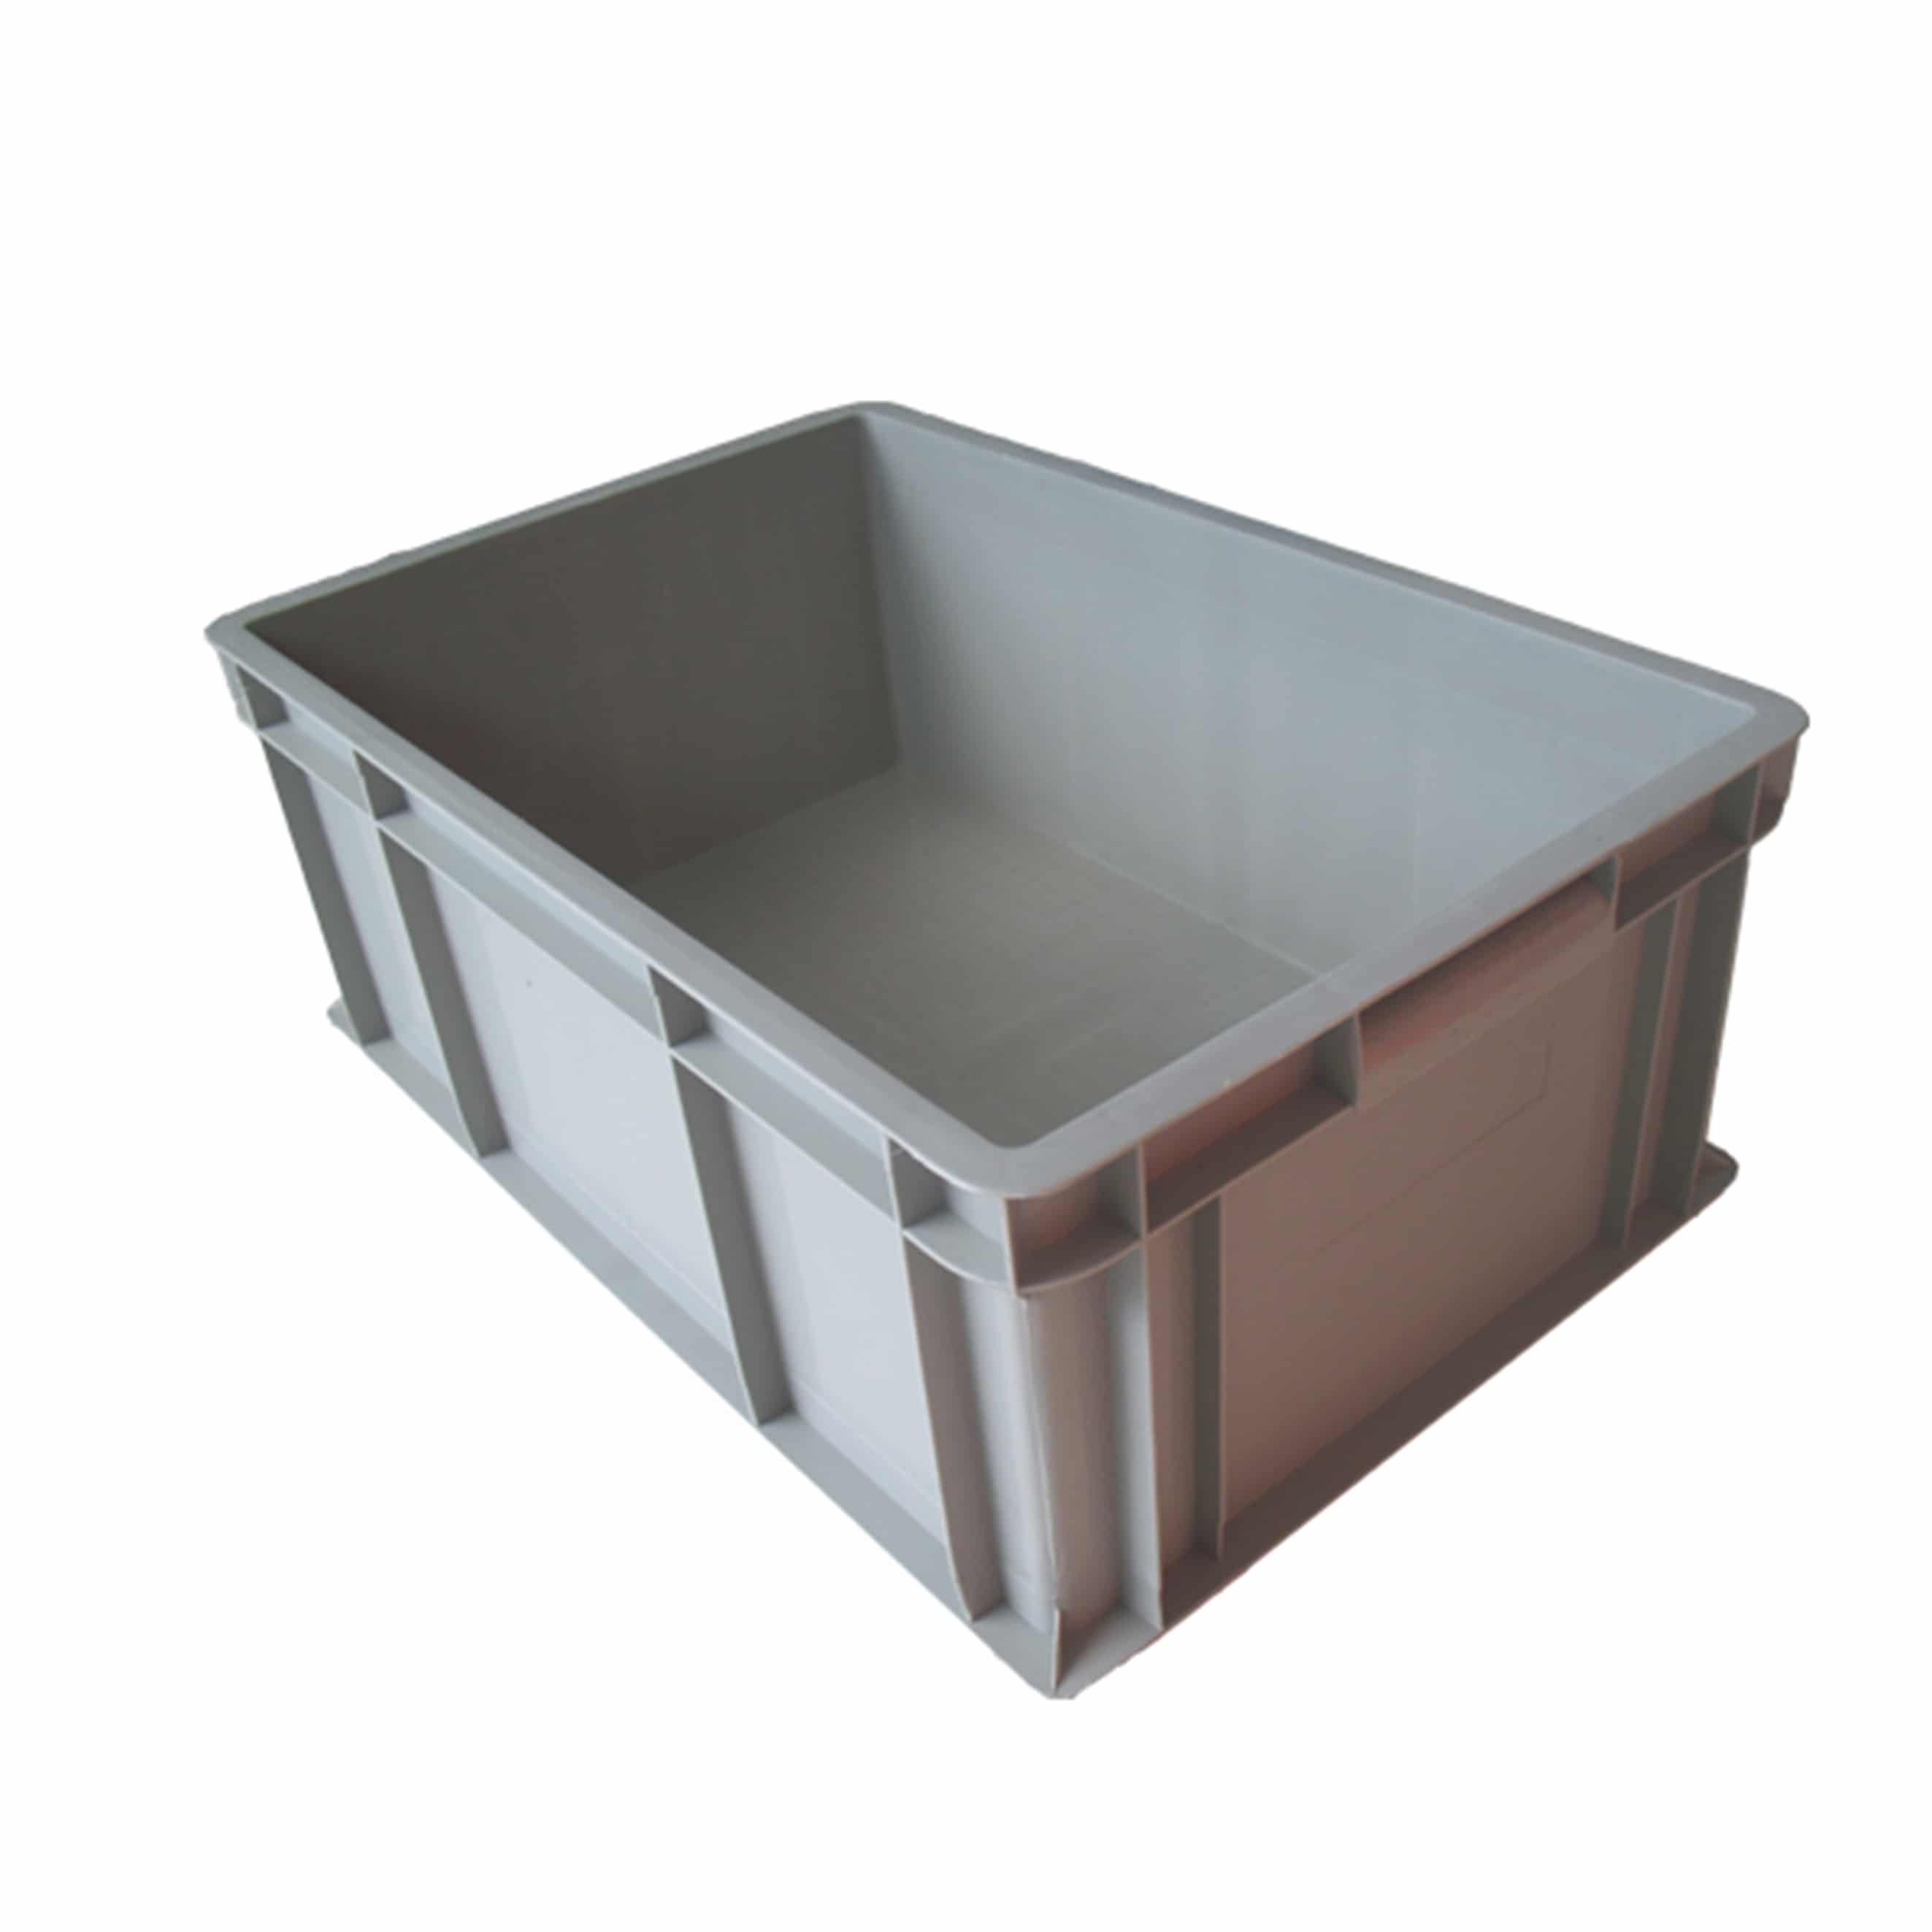 15X Plastic Storage Bins Boxes stackable space bin container box 255X400X150 mm 